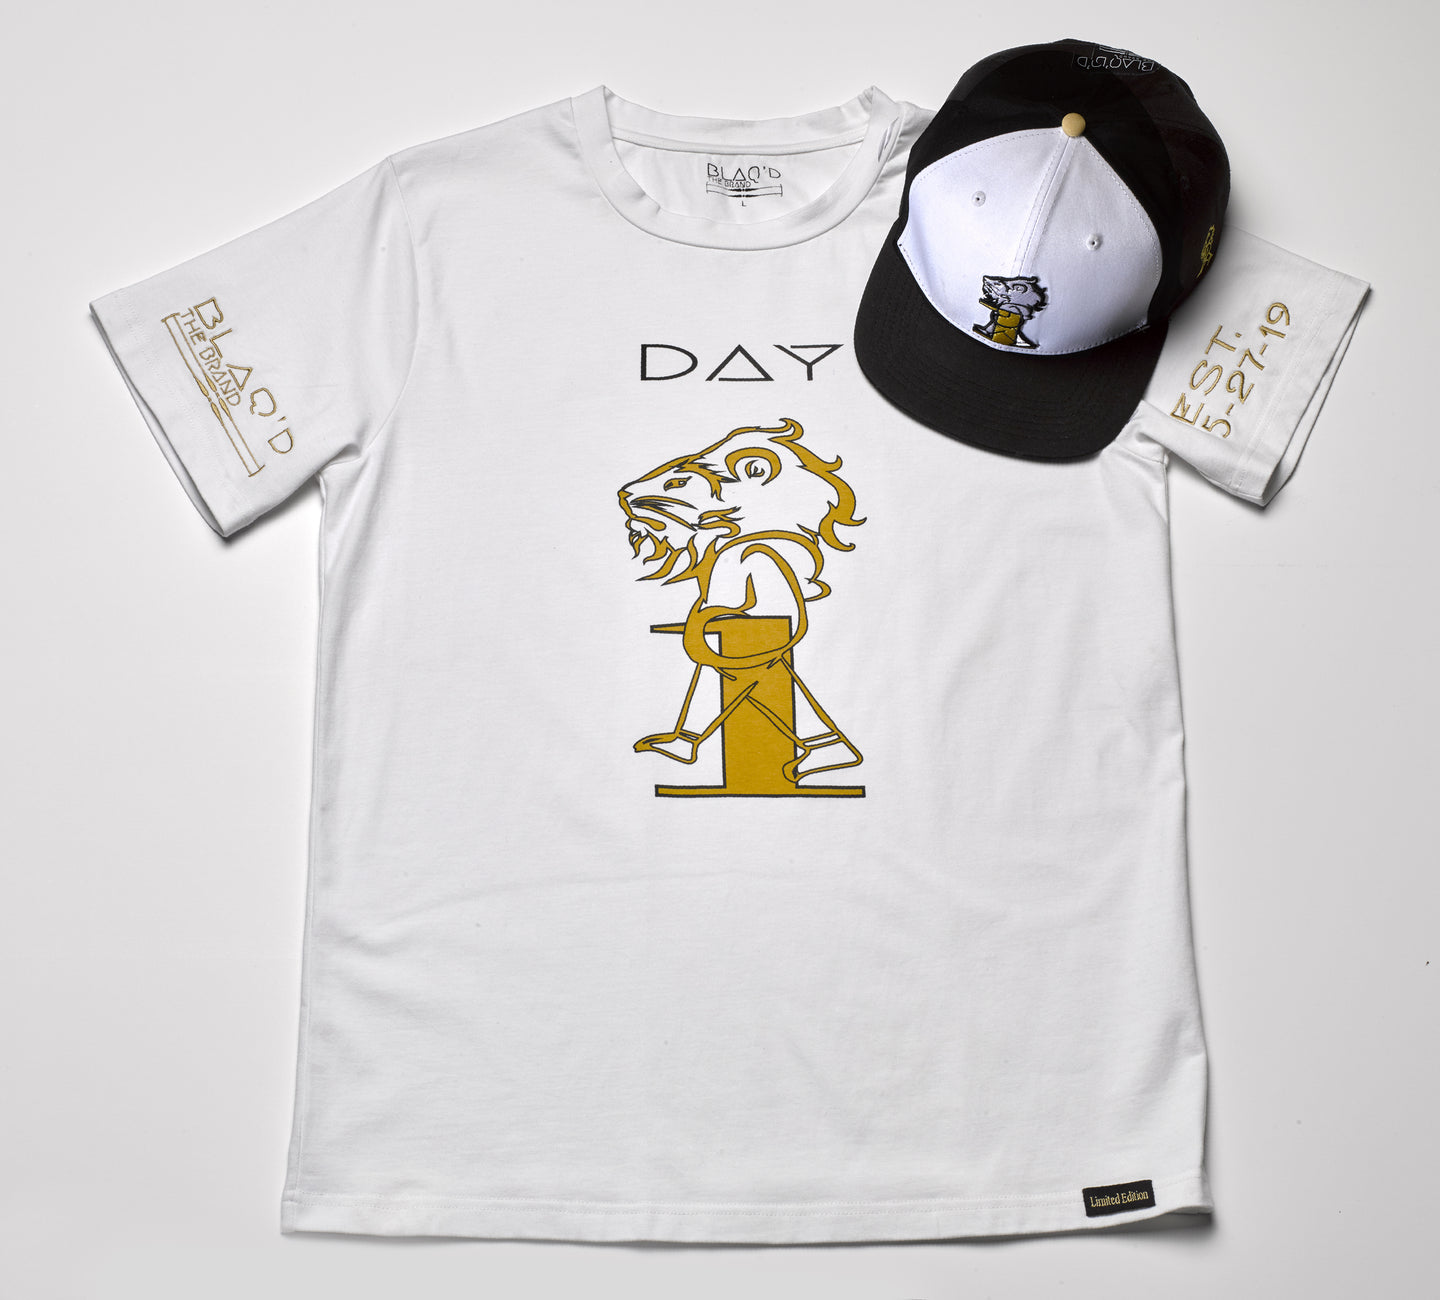 DAY 1 Limited Edition Launch Apparel